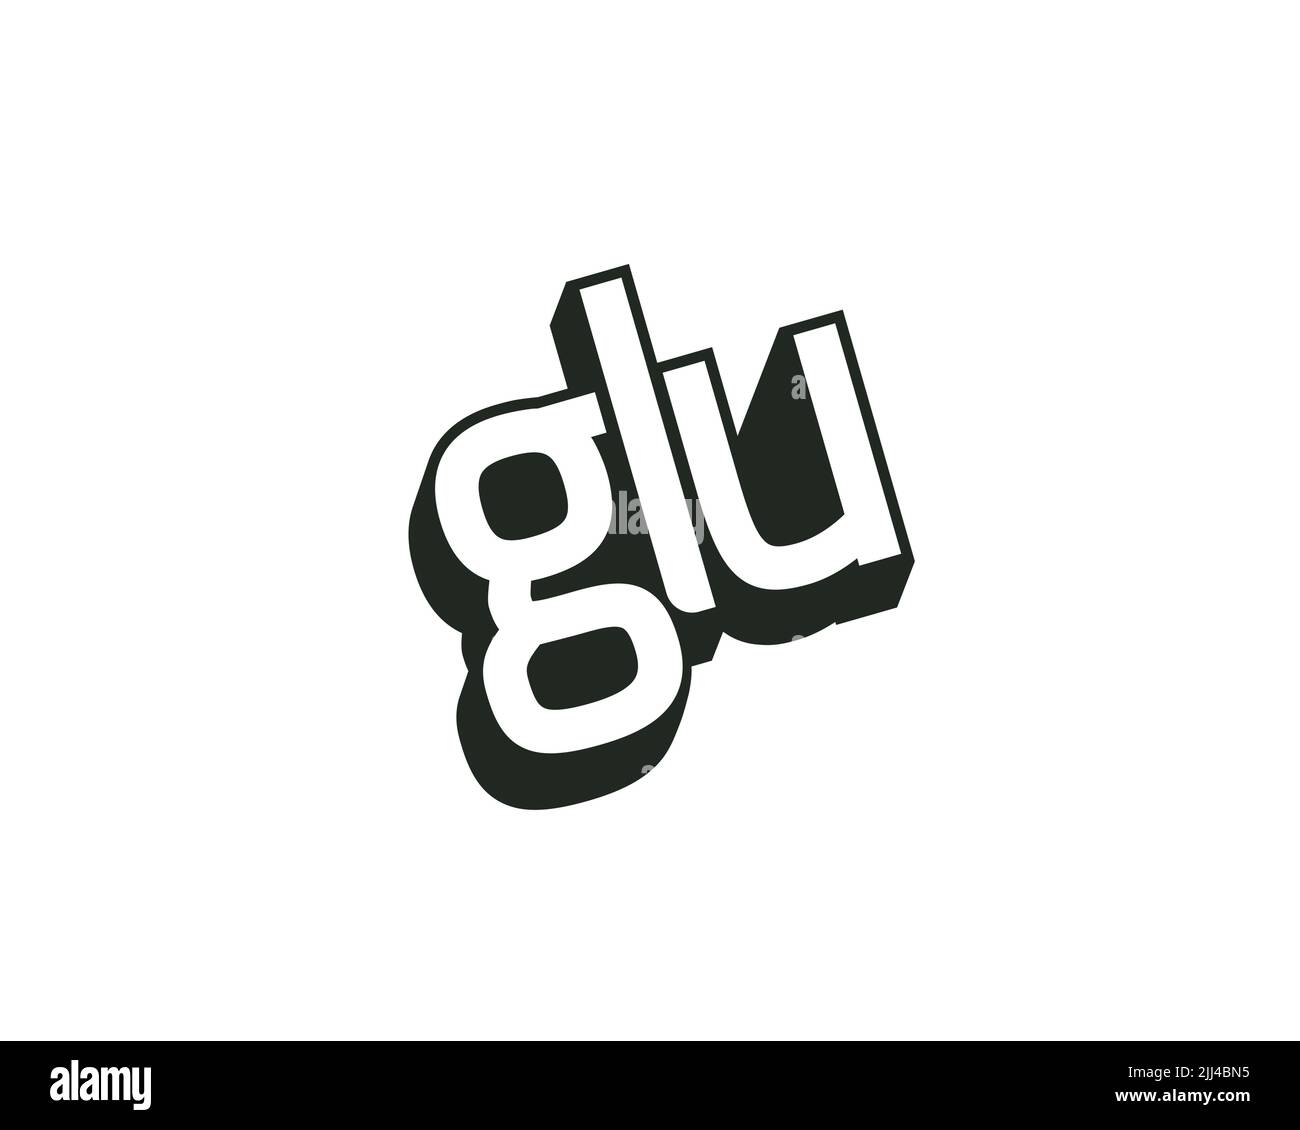 Glu logo Cut Out Stock Images & Pictures - Alamy